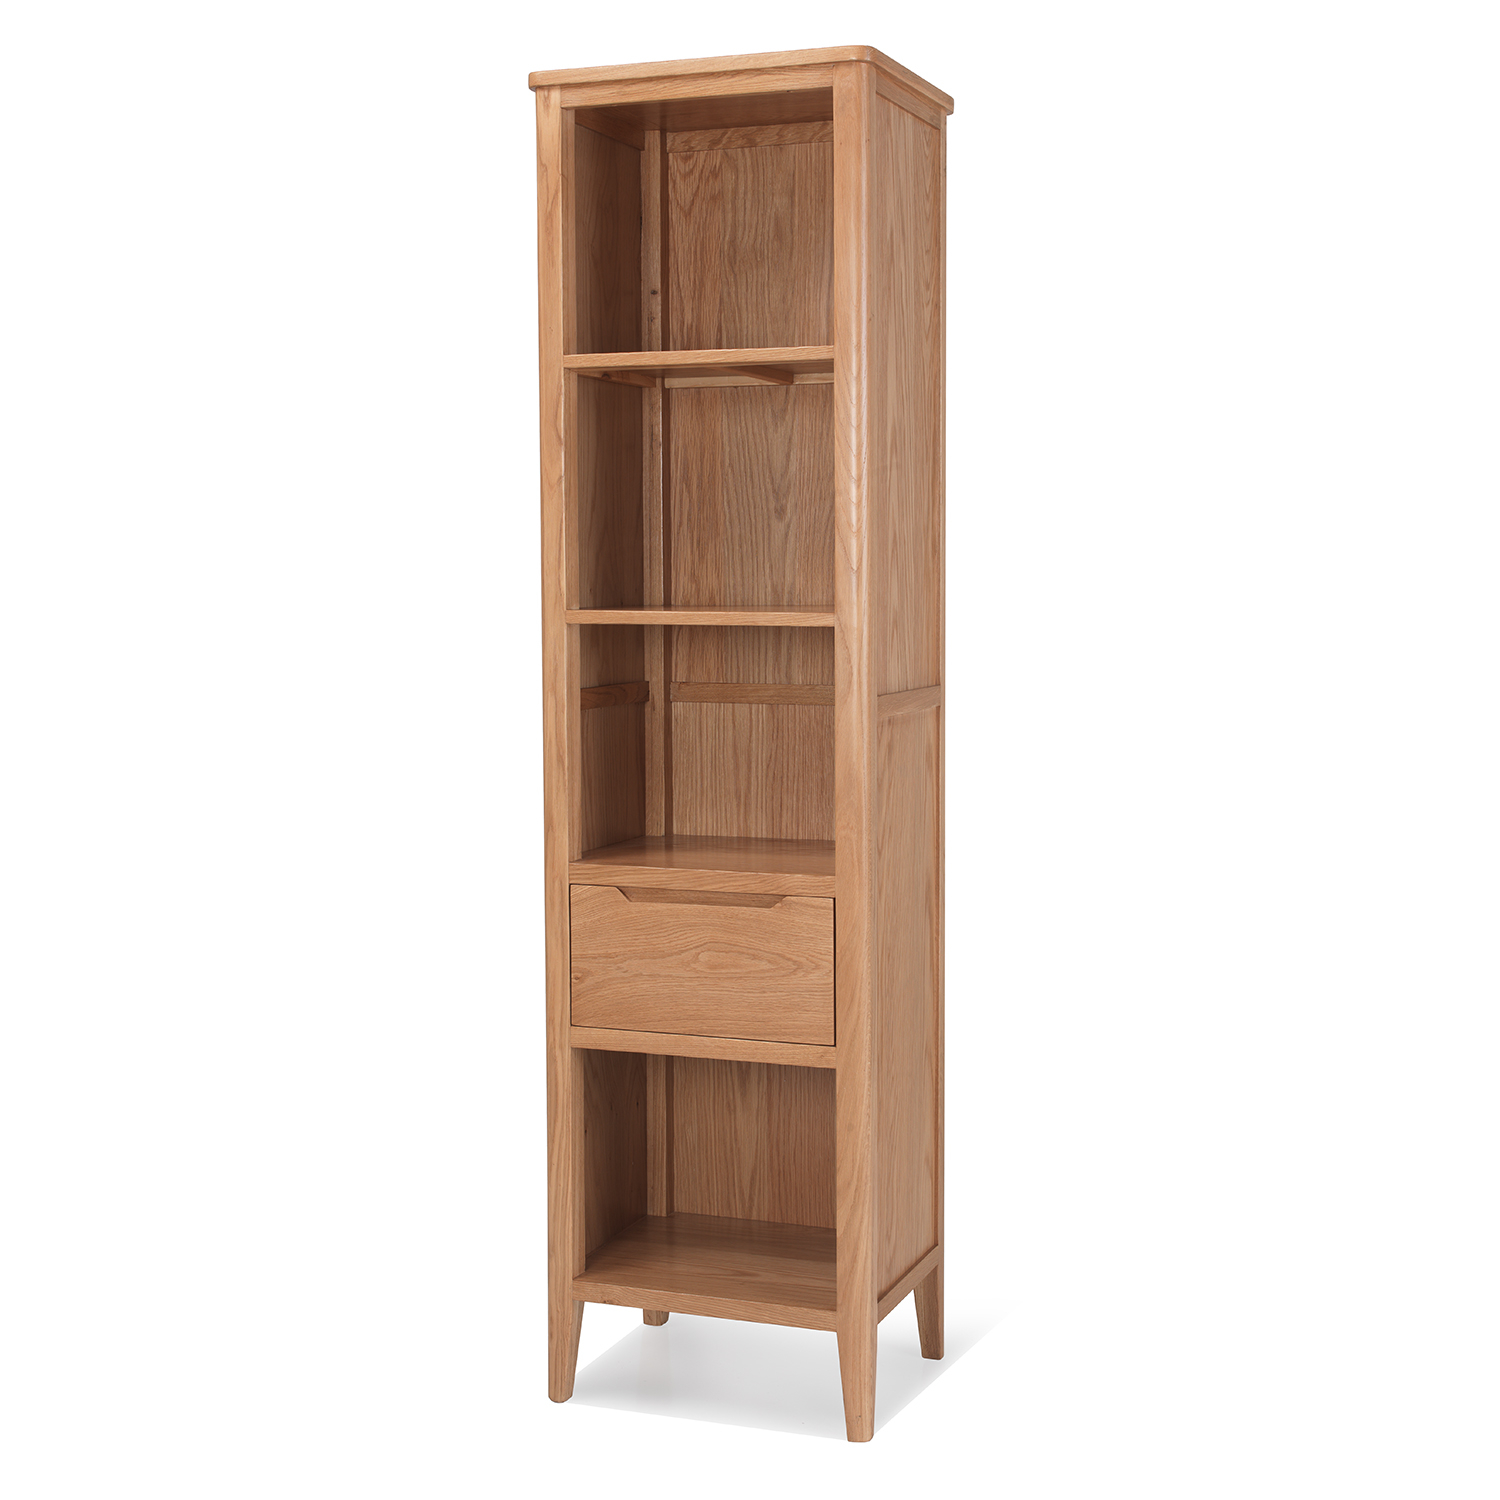 Latest Narrow Bookcase With Drawers Information